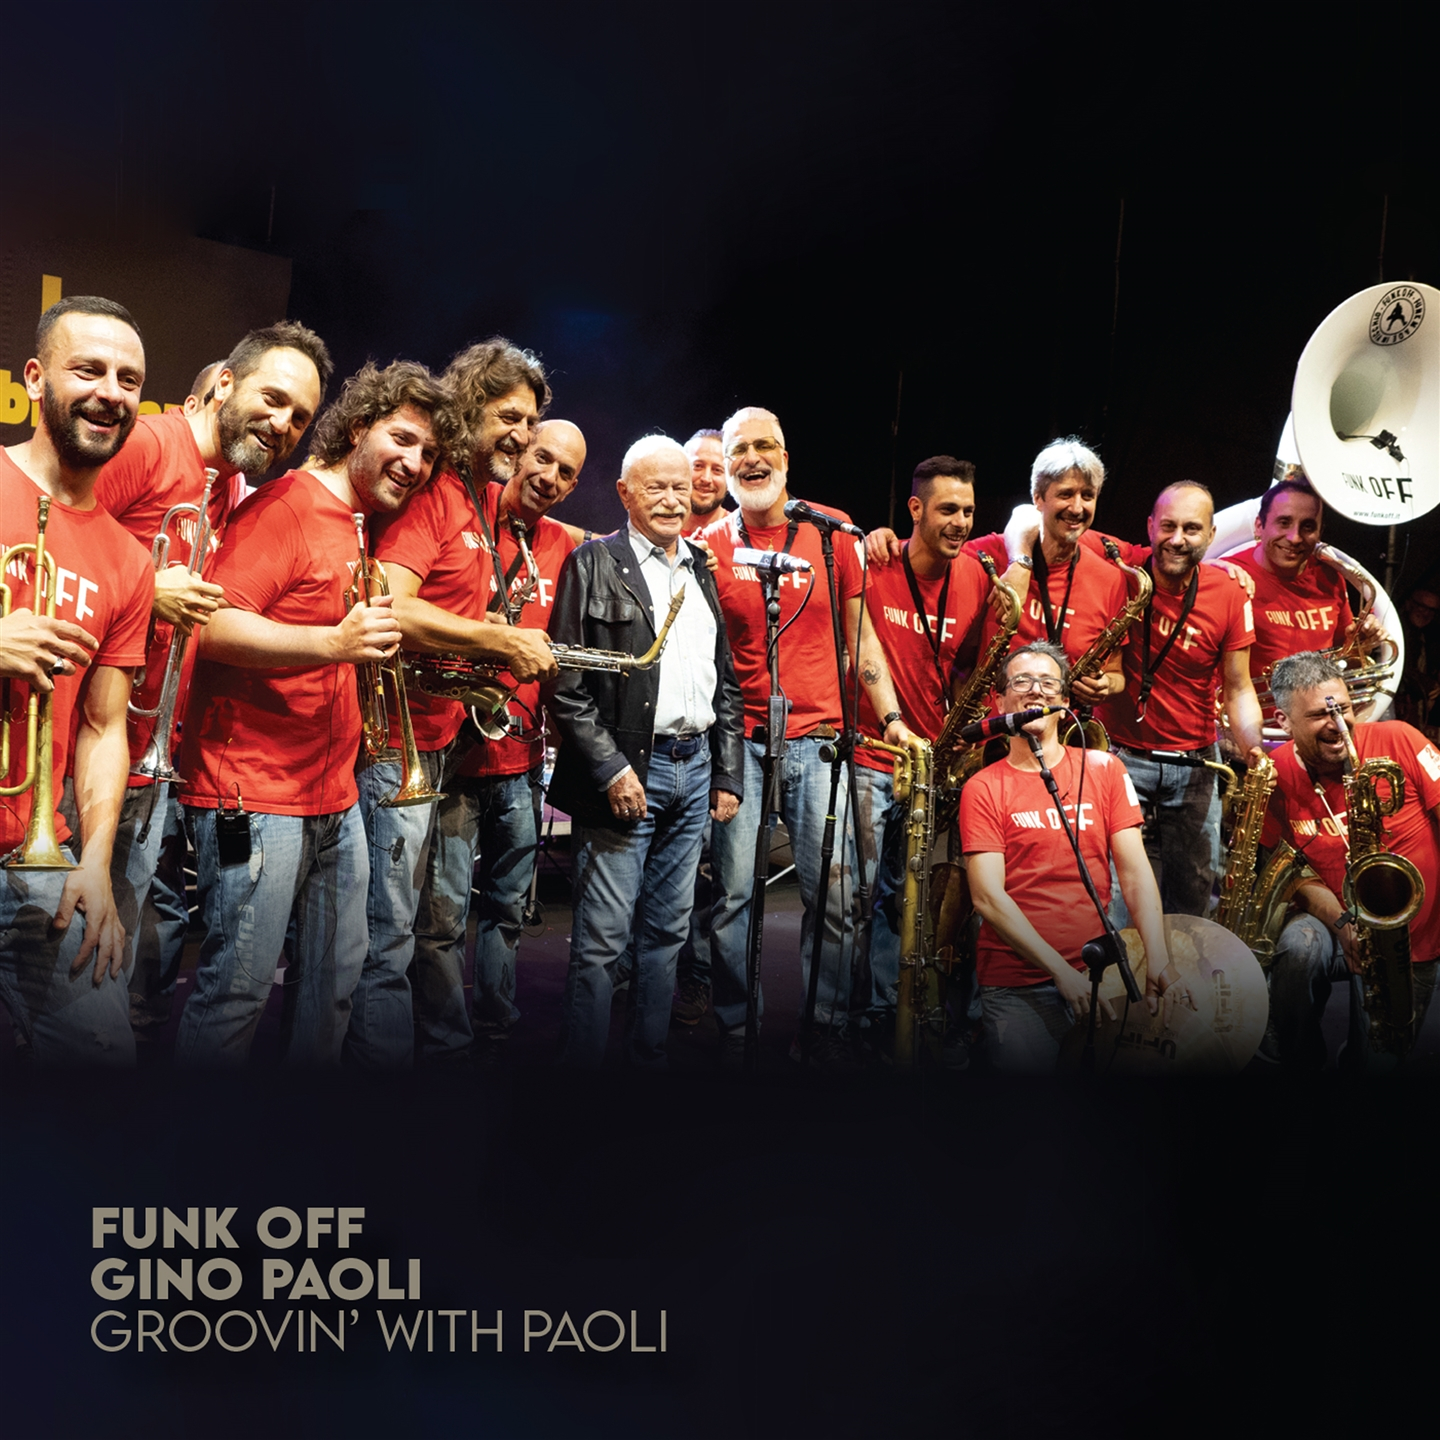 Funk Off, Gino Paoli - Groovin' With Paoli - Picture 1 of 1